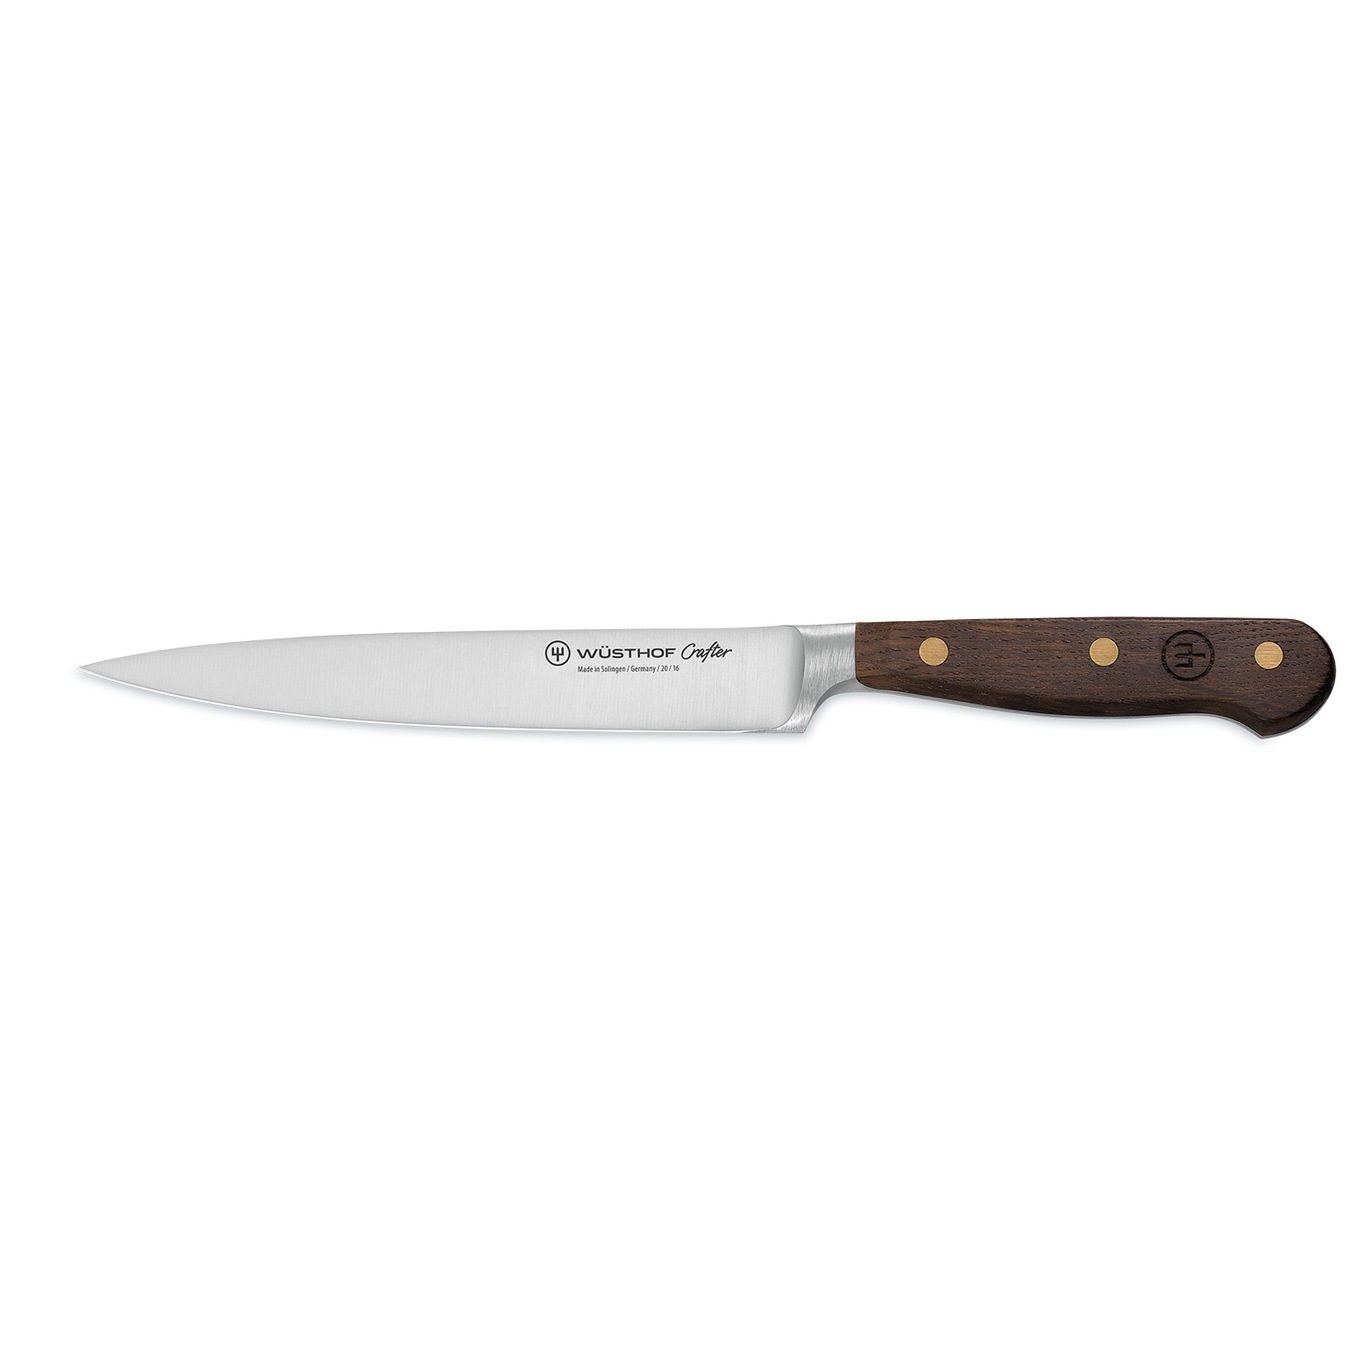 Crafter Utility Knife, 16 cm